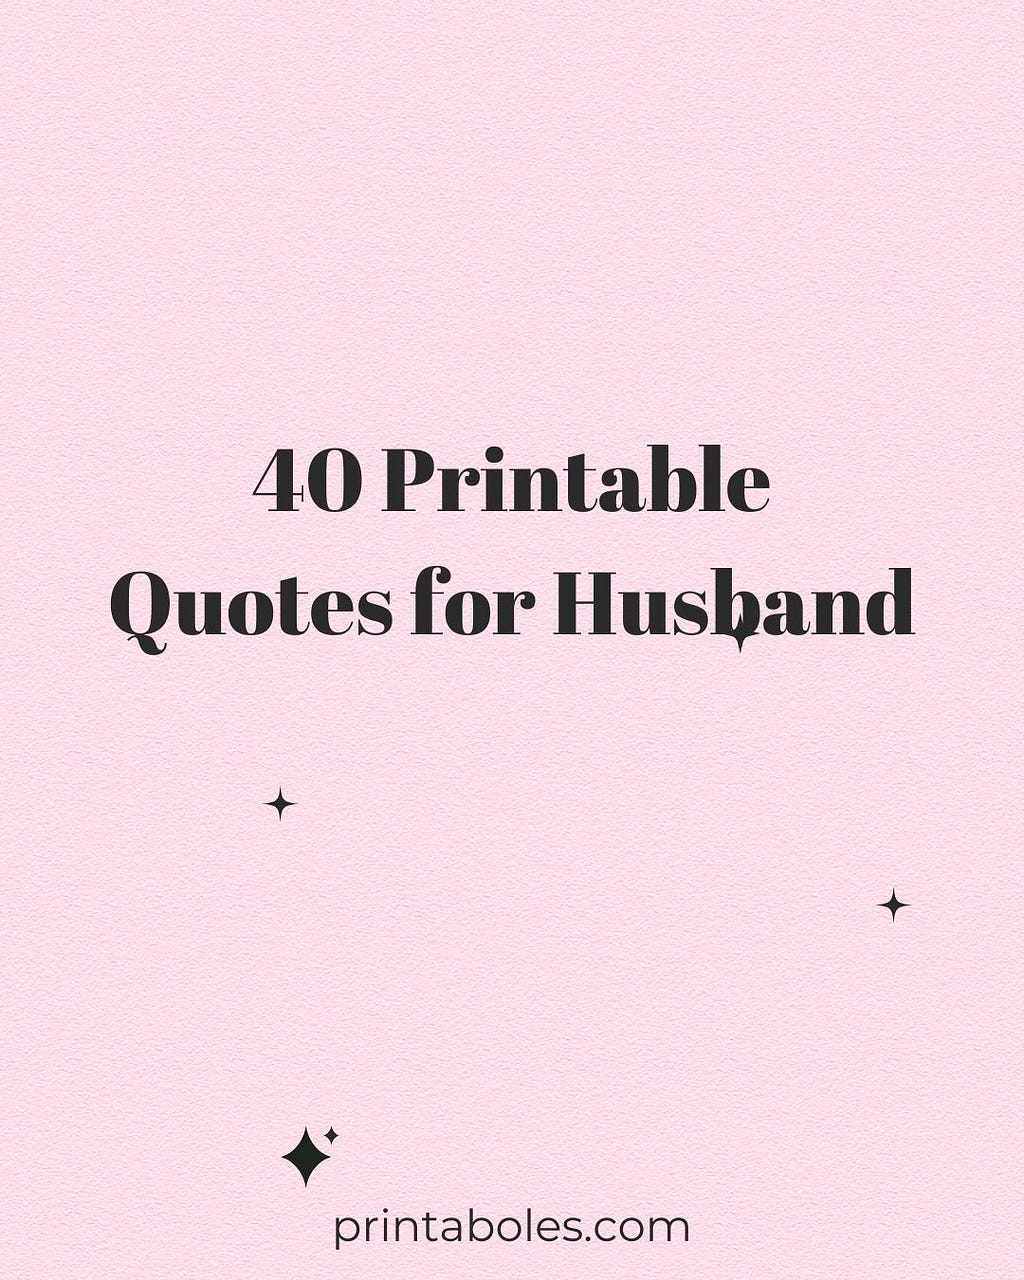 40 Printable Quotes to Show Appreciation to Your Amazing Husband